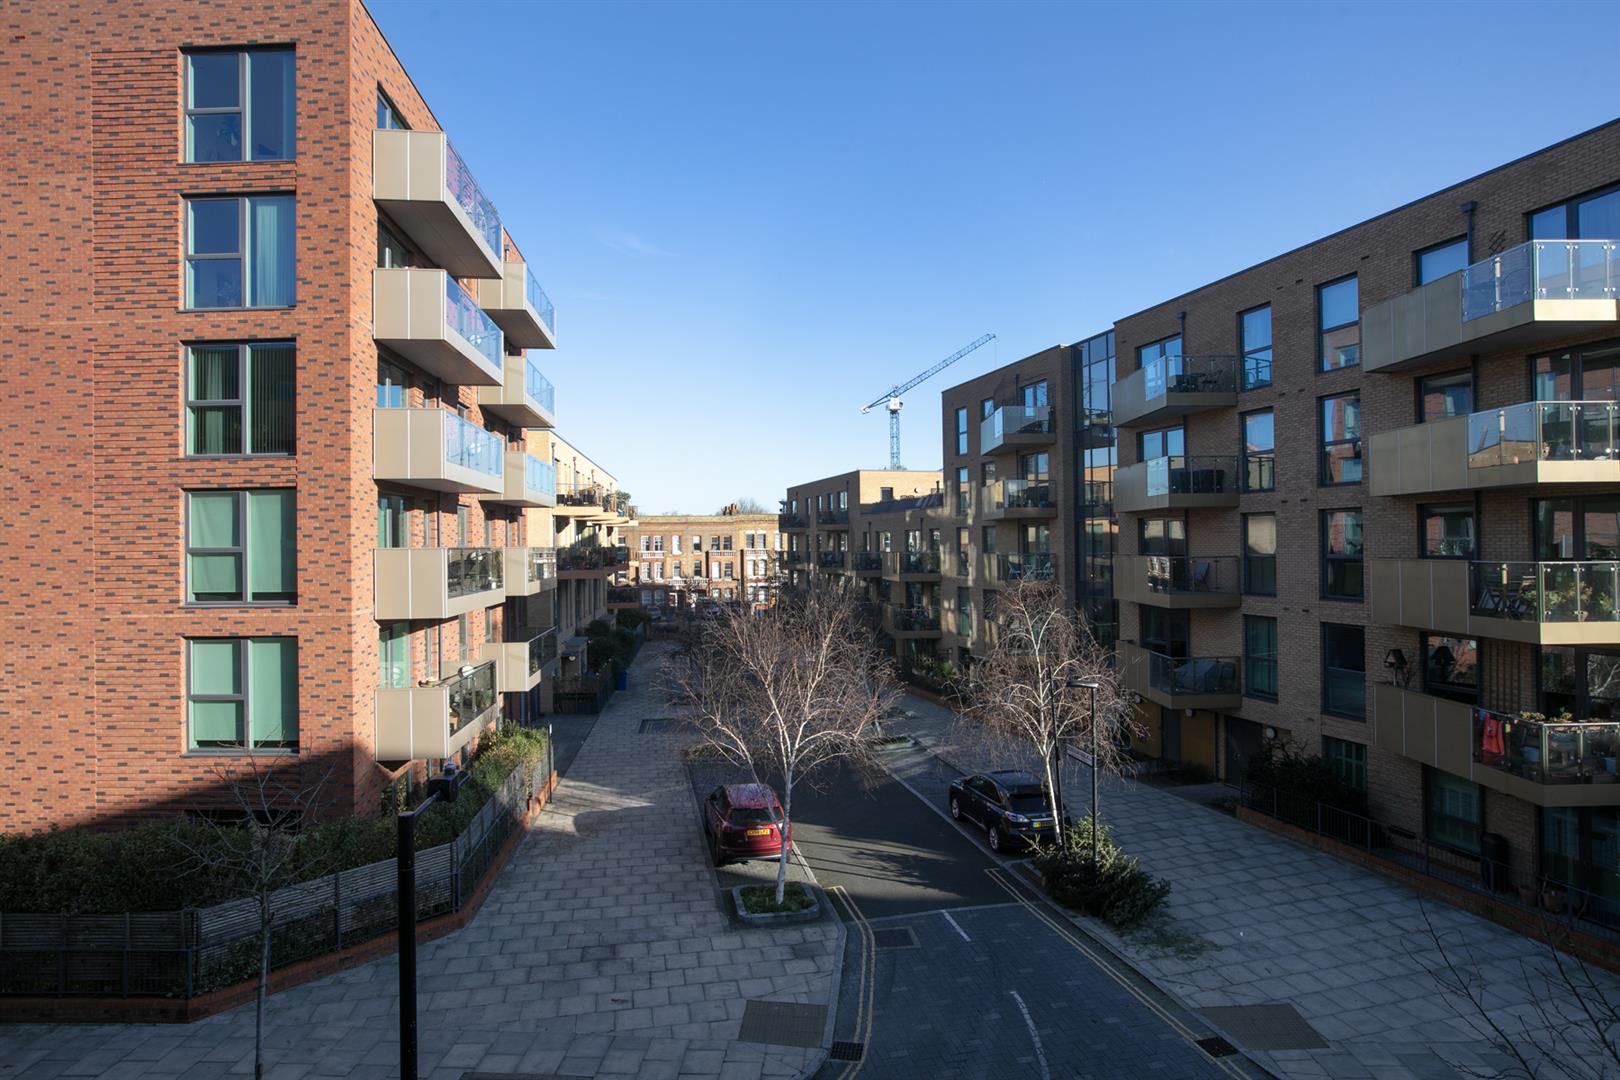 Flat/Apartment For Sale in Edmund Street, Camberwell, SE5 1176 view7